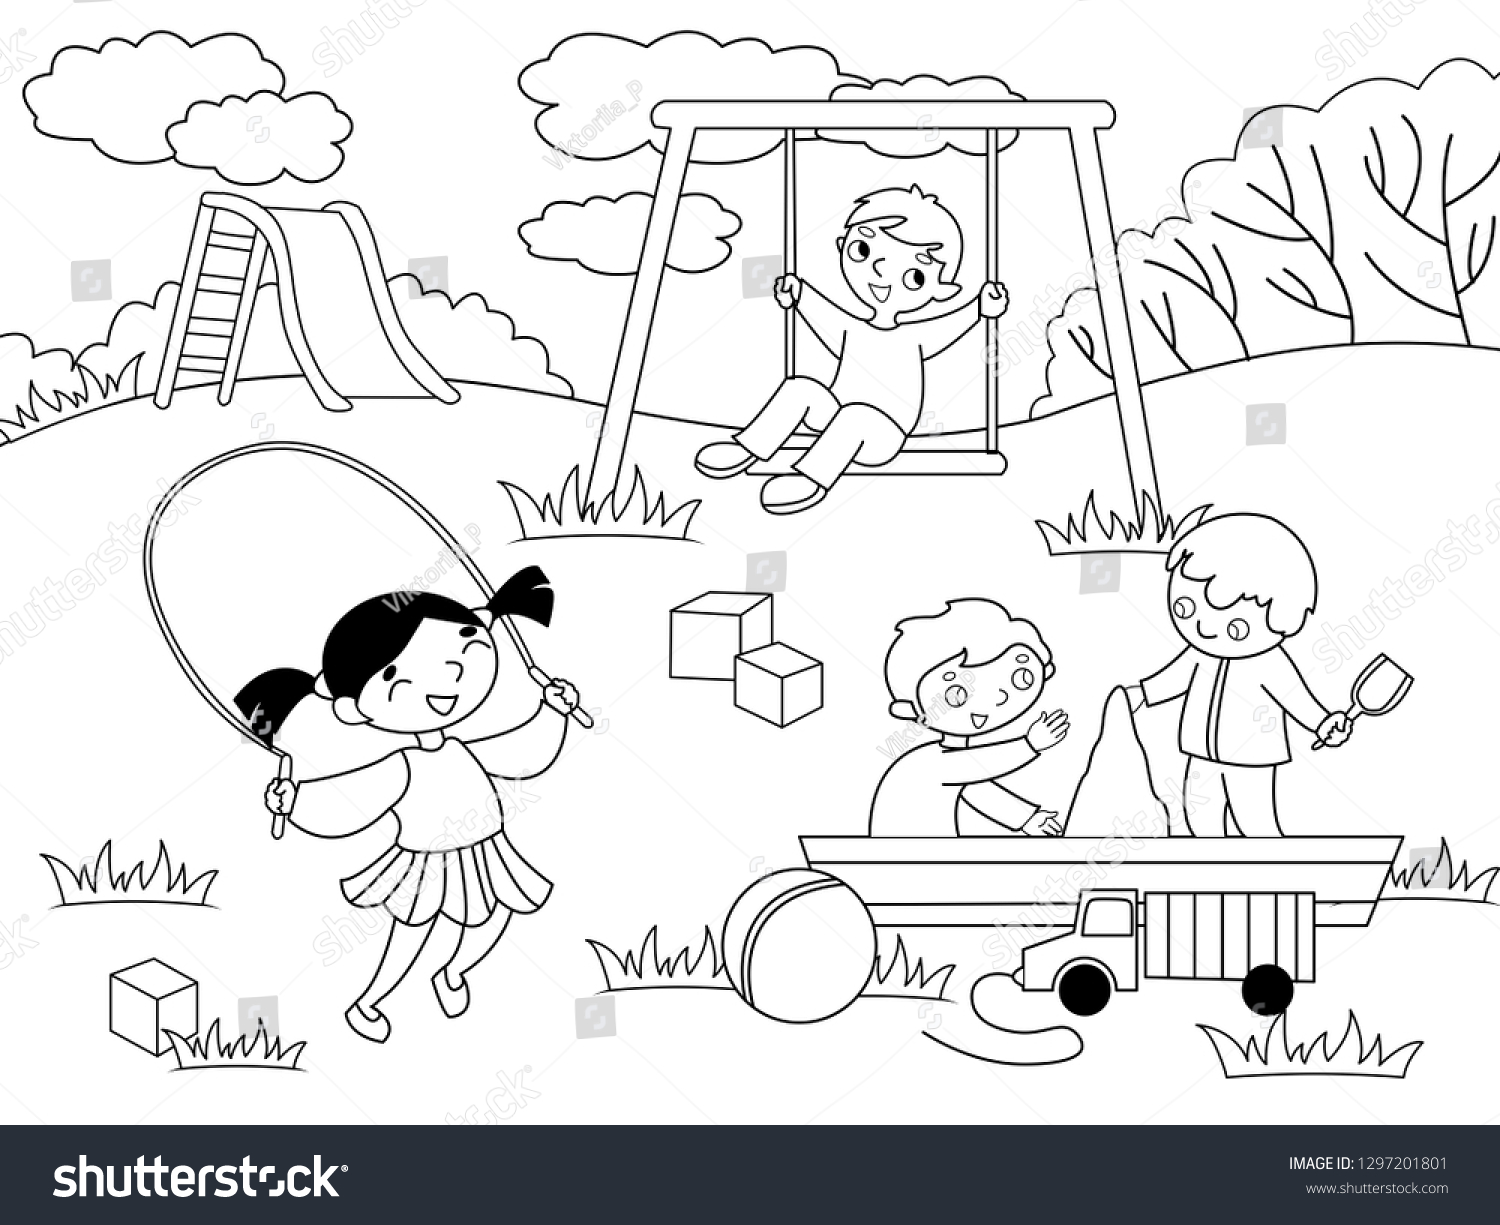 Children Park Clipart Black And White Clipart Station | Images and ...